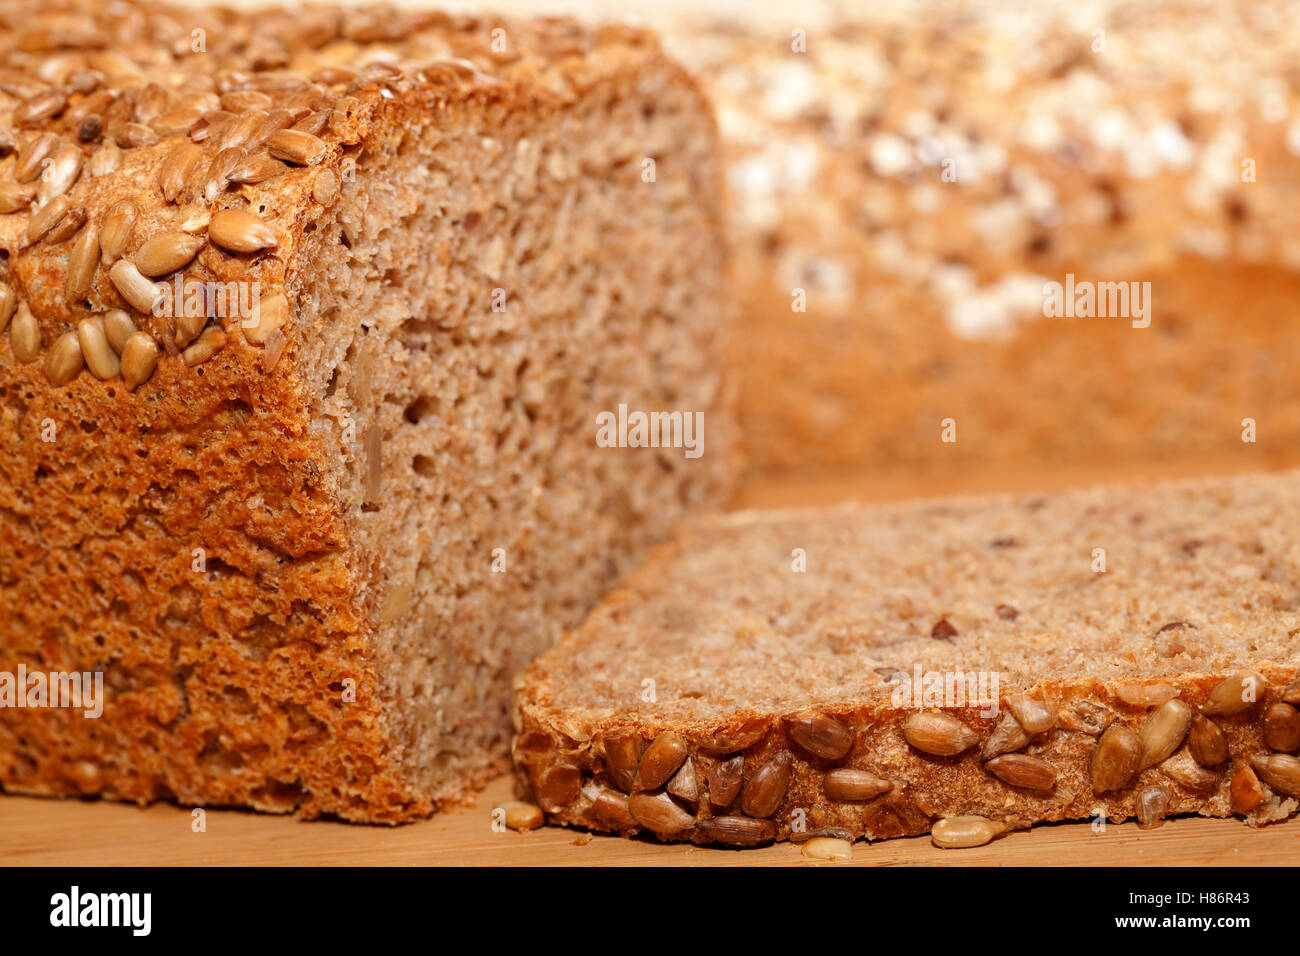 whole bread and slice of bread as background Stock Photo